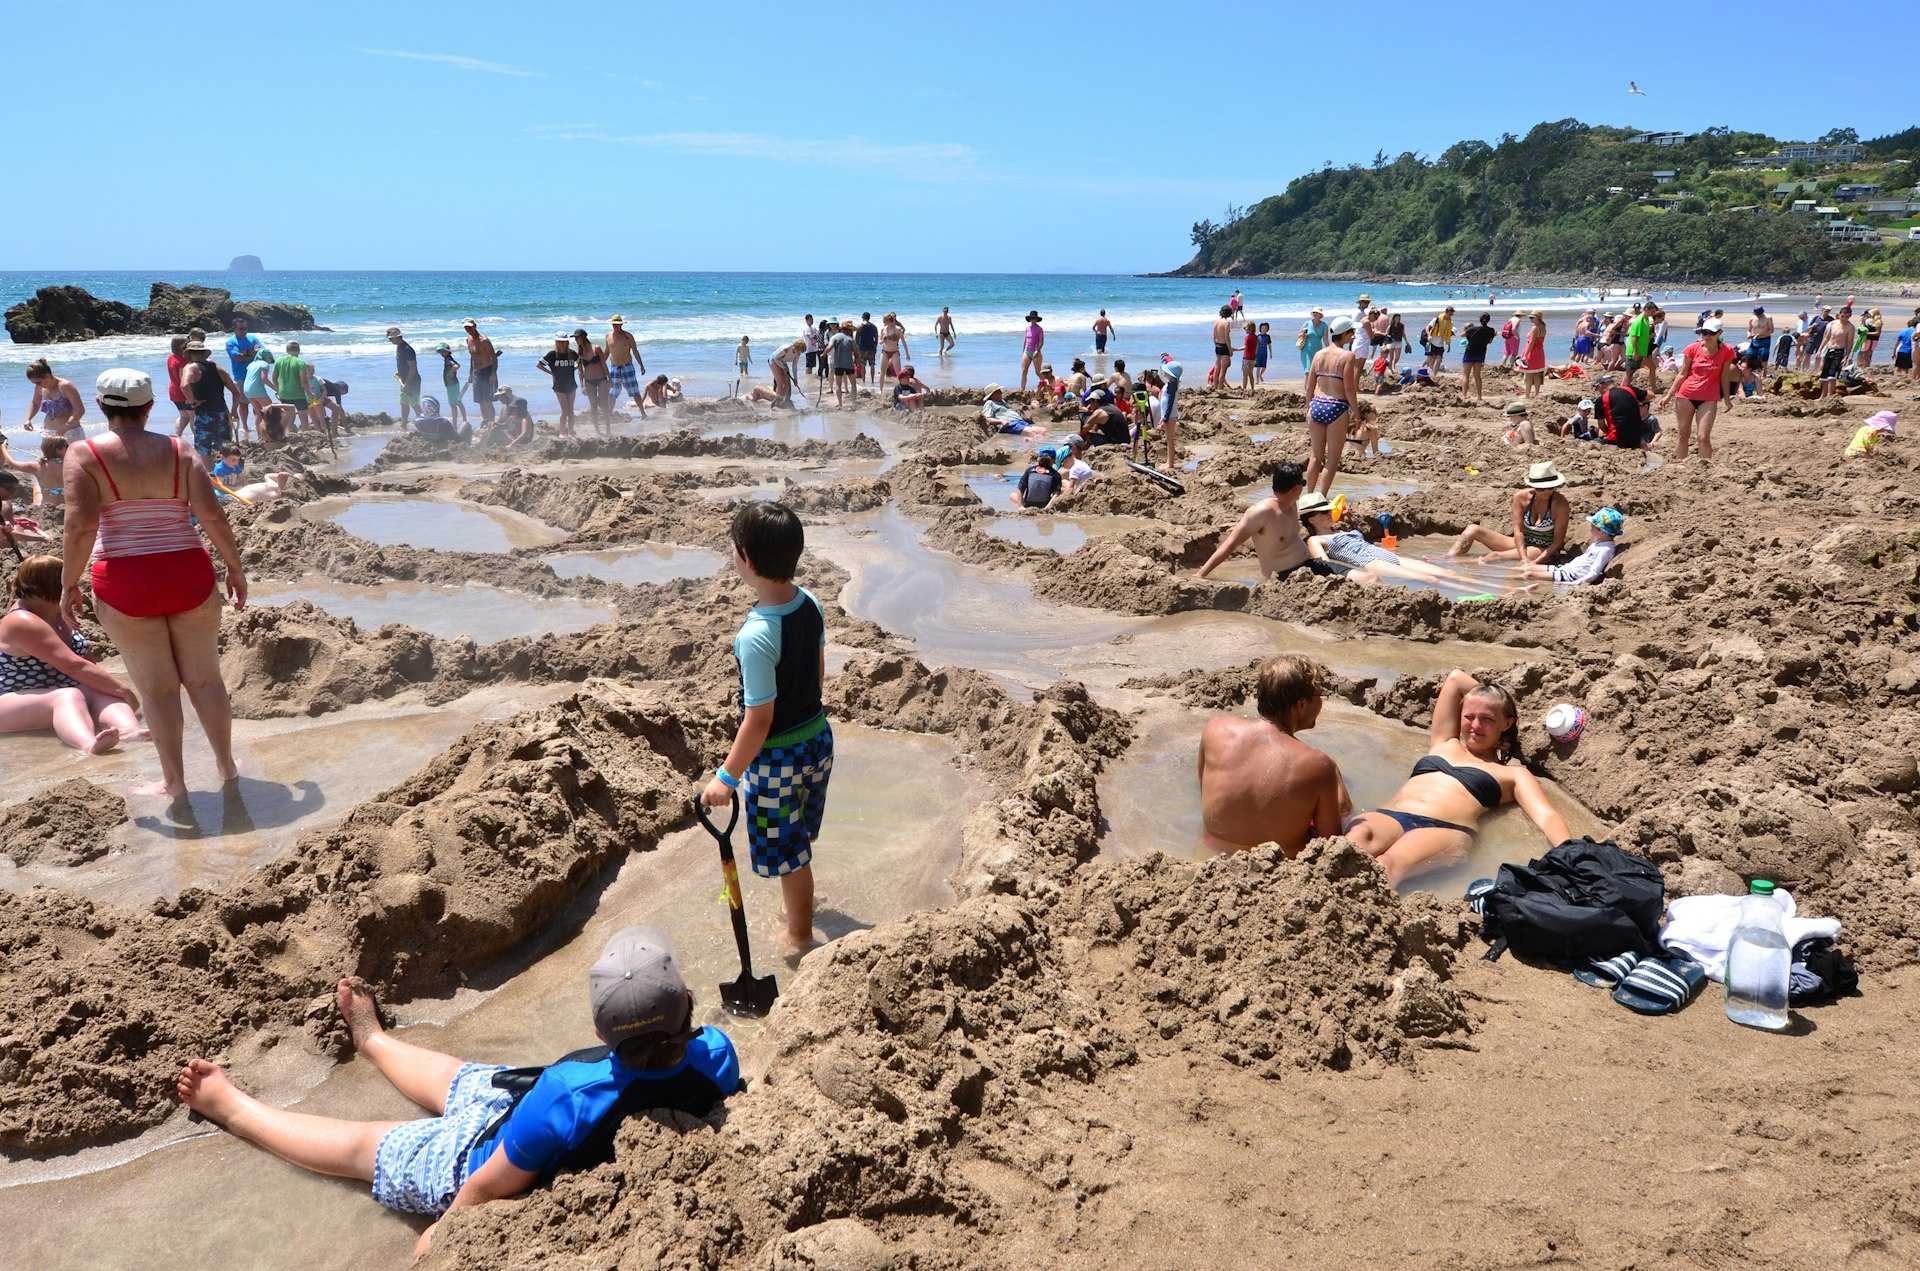 Visitors making small hot water pools in Hot Water beach.it one of the most popular geothermal attractions in New Zealand, about 700,000 people visit the beach annually. 